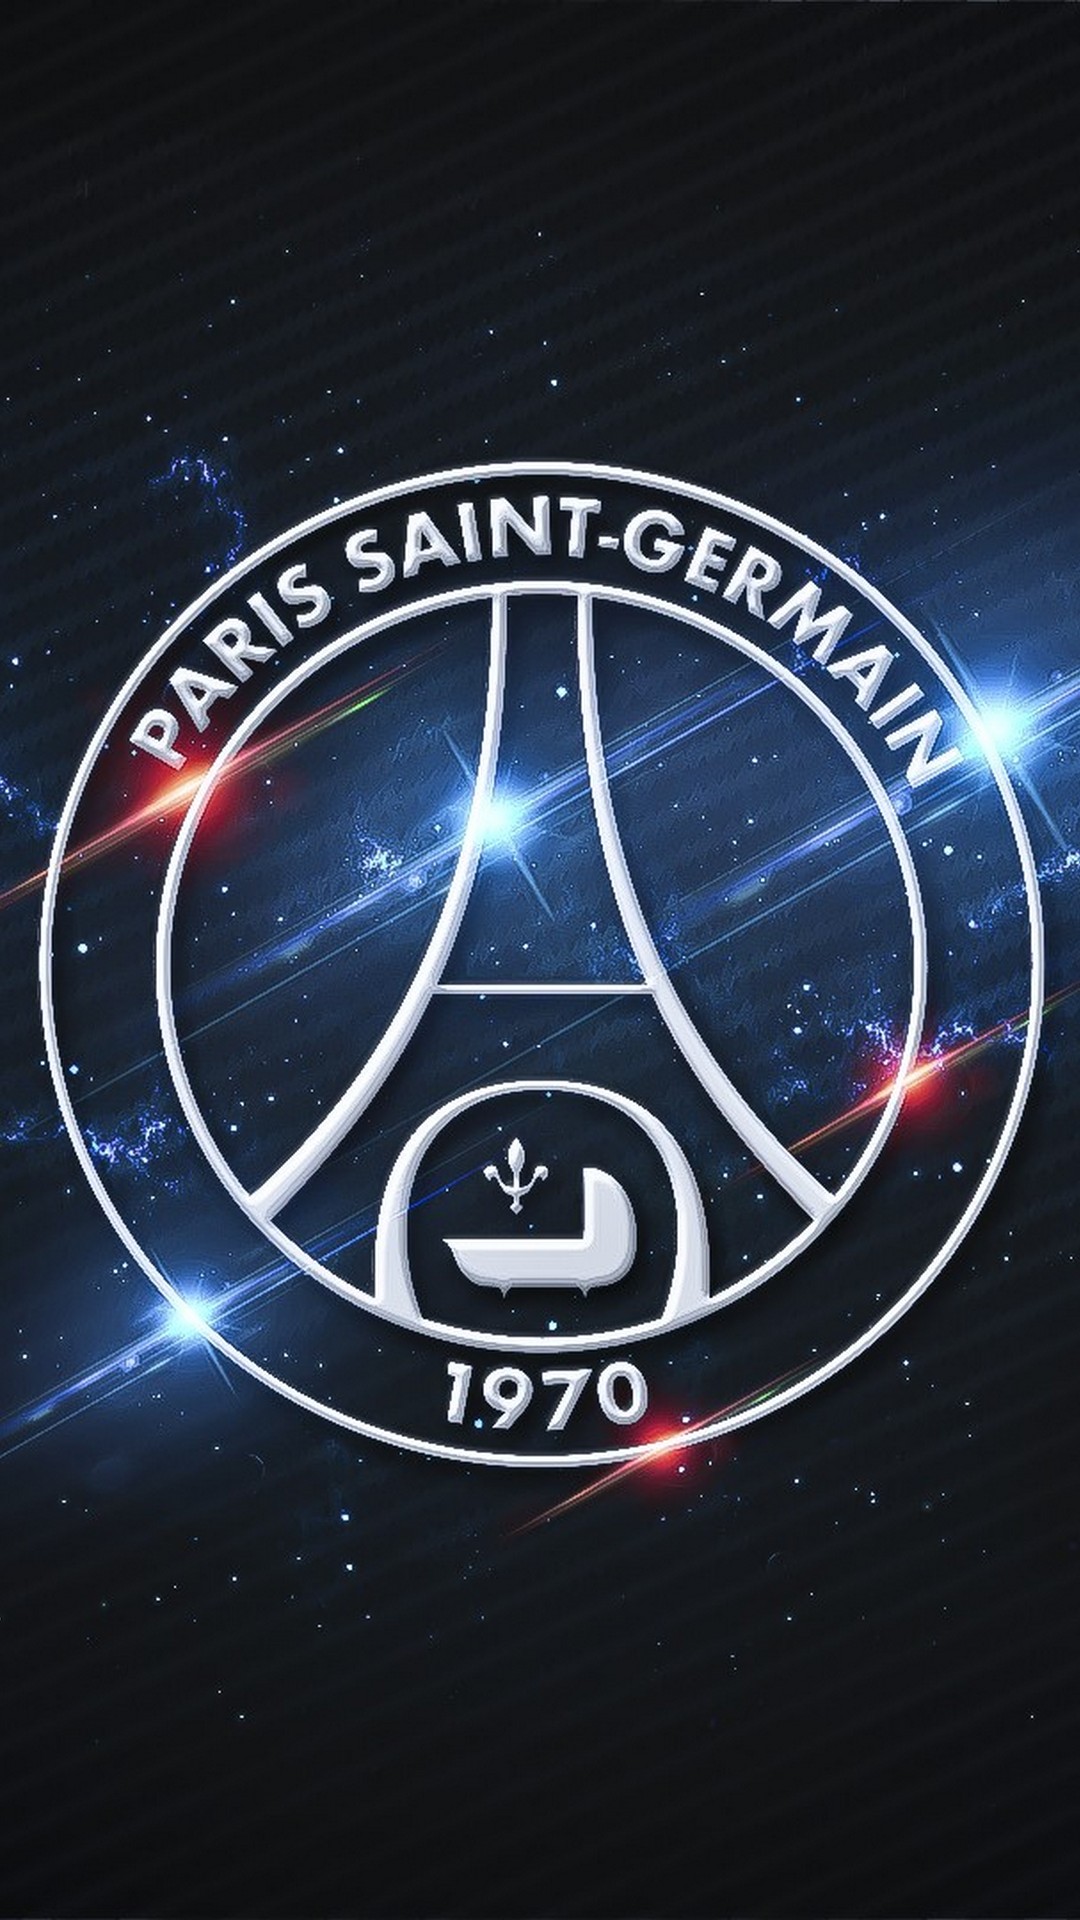 PSG HD Wallpaper For iPhone With Resolution 1080X1920 pixel. You can make this wallpaper for your Mac or Windows Desktop Background, iPhone, Android or Tablet and another Smartphone device for free